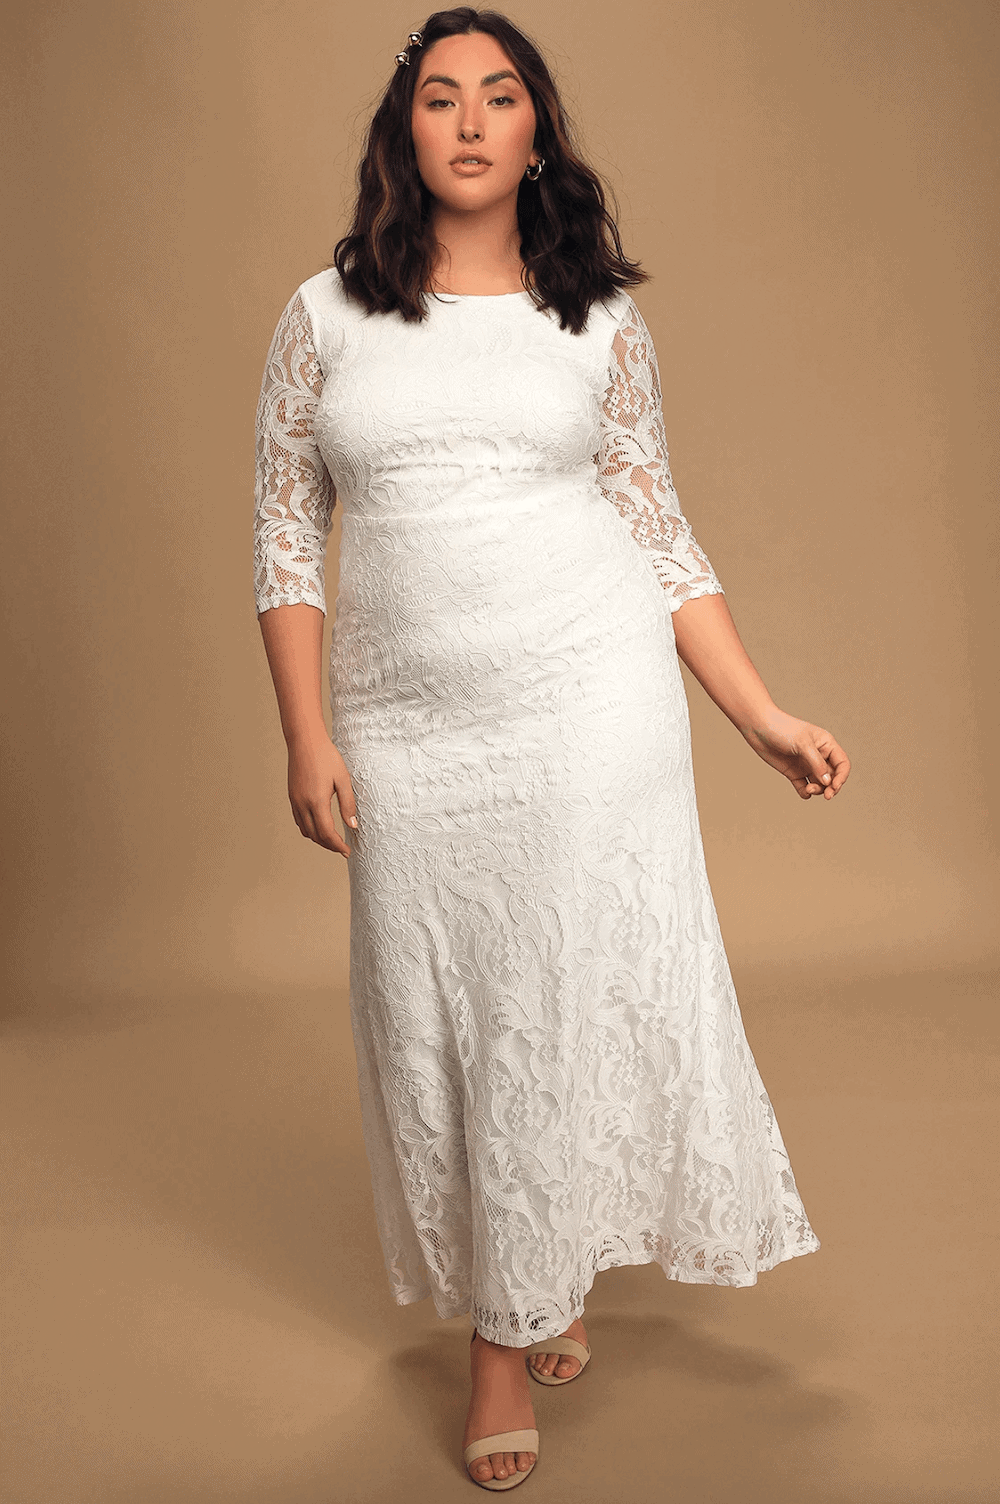 Plus Size Wedding Dresses with Sleeves Online Cheap Curvy Brides Lace Backless Dress Lulus